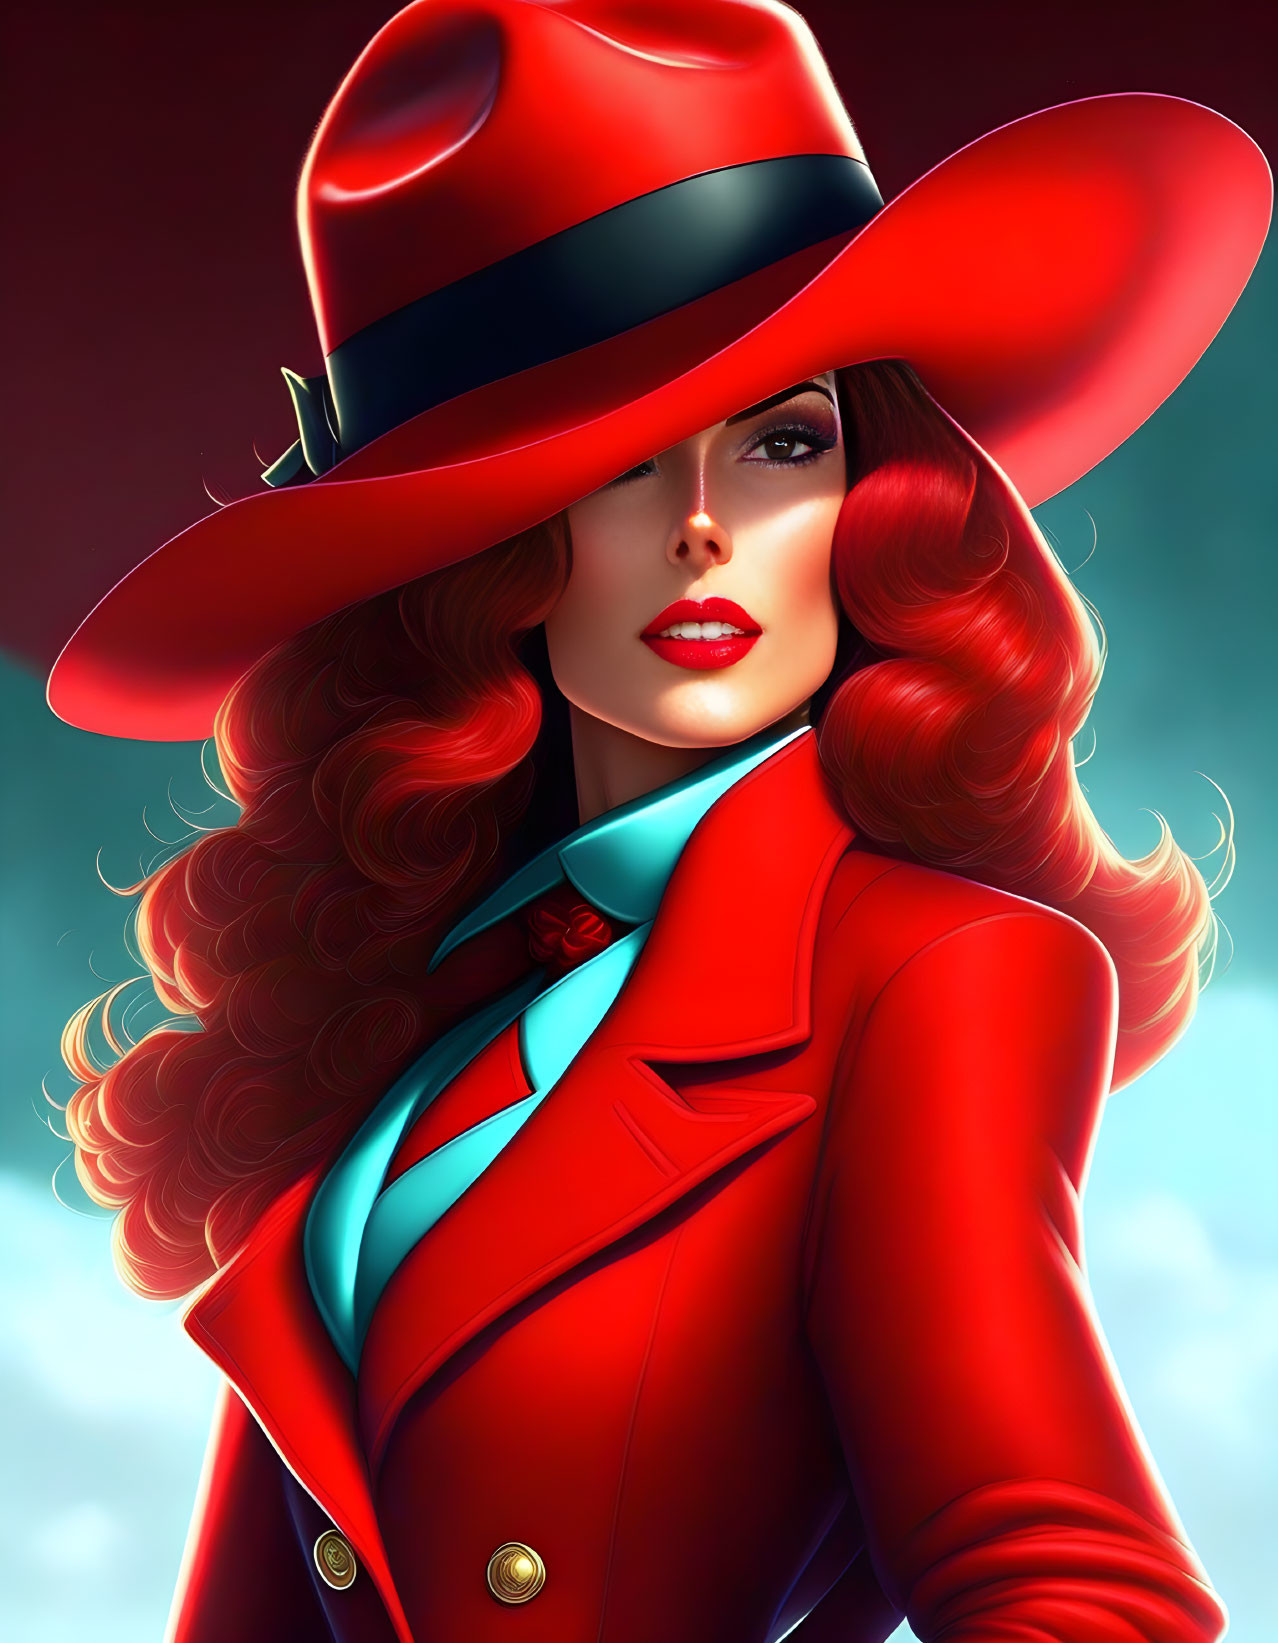 Stylized illustration of woman with red hair in red hat and coat